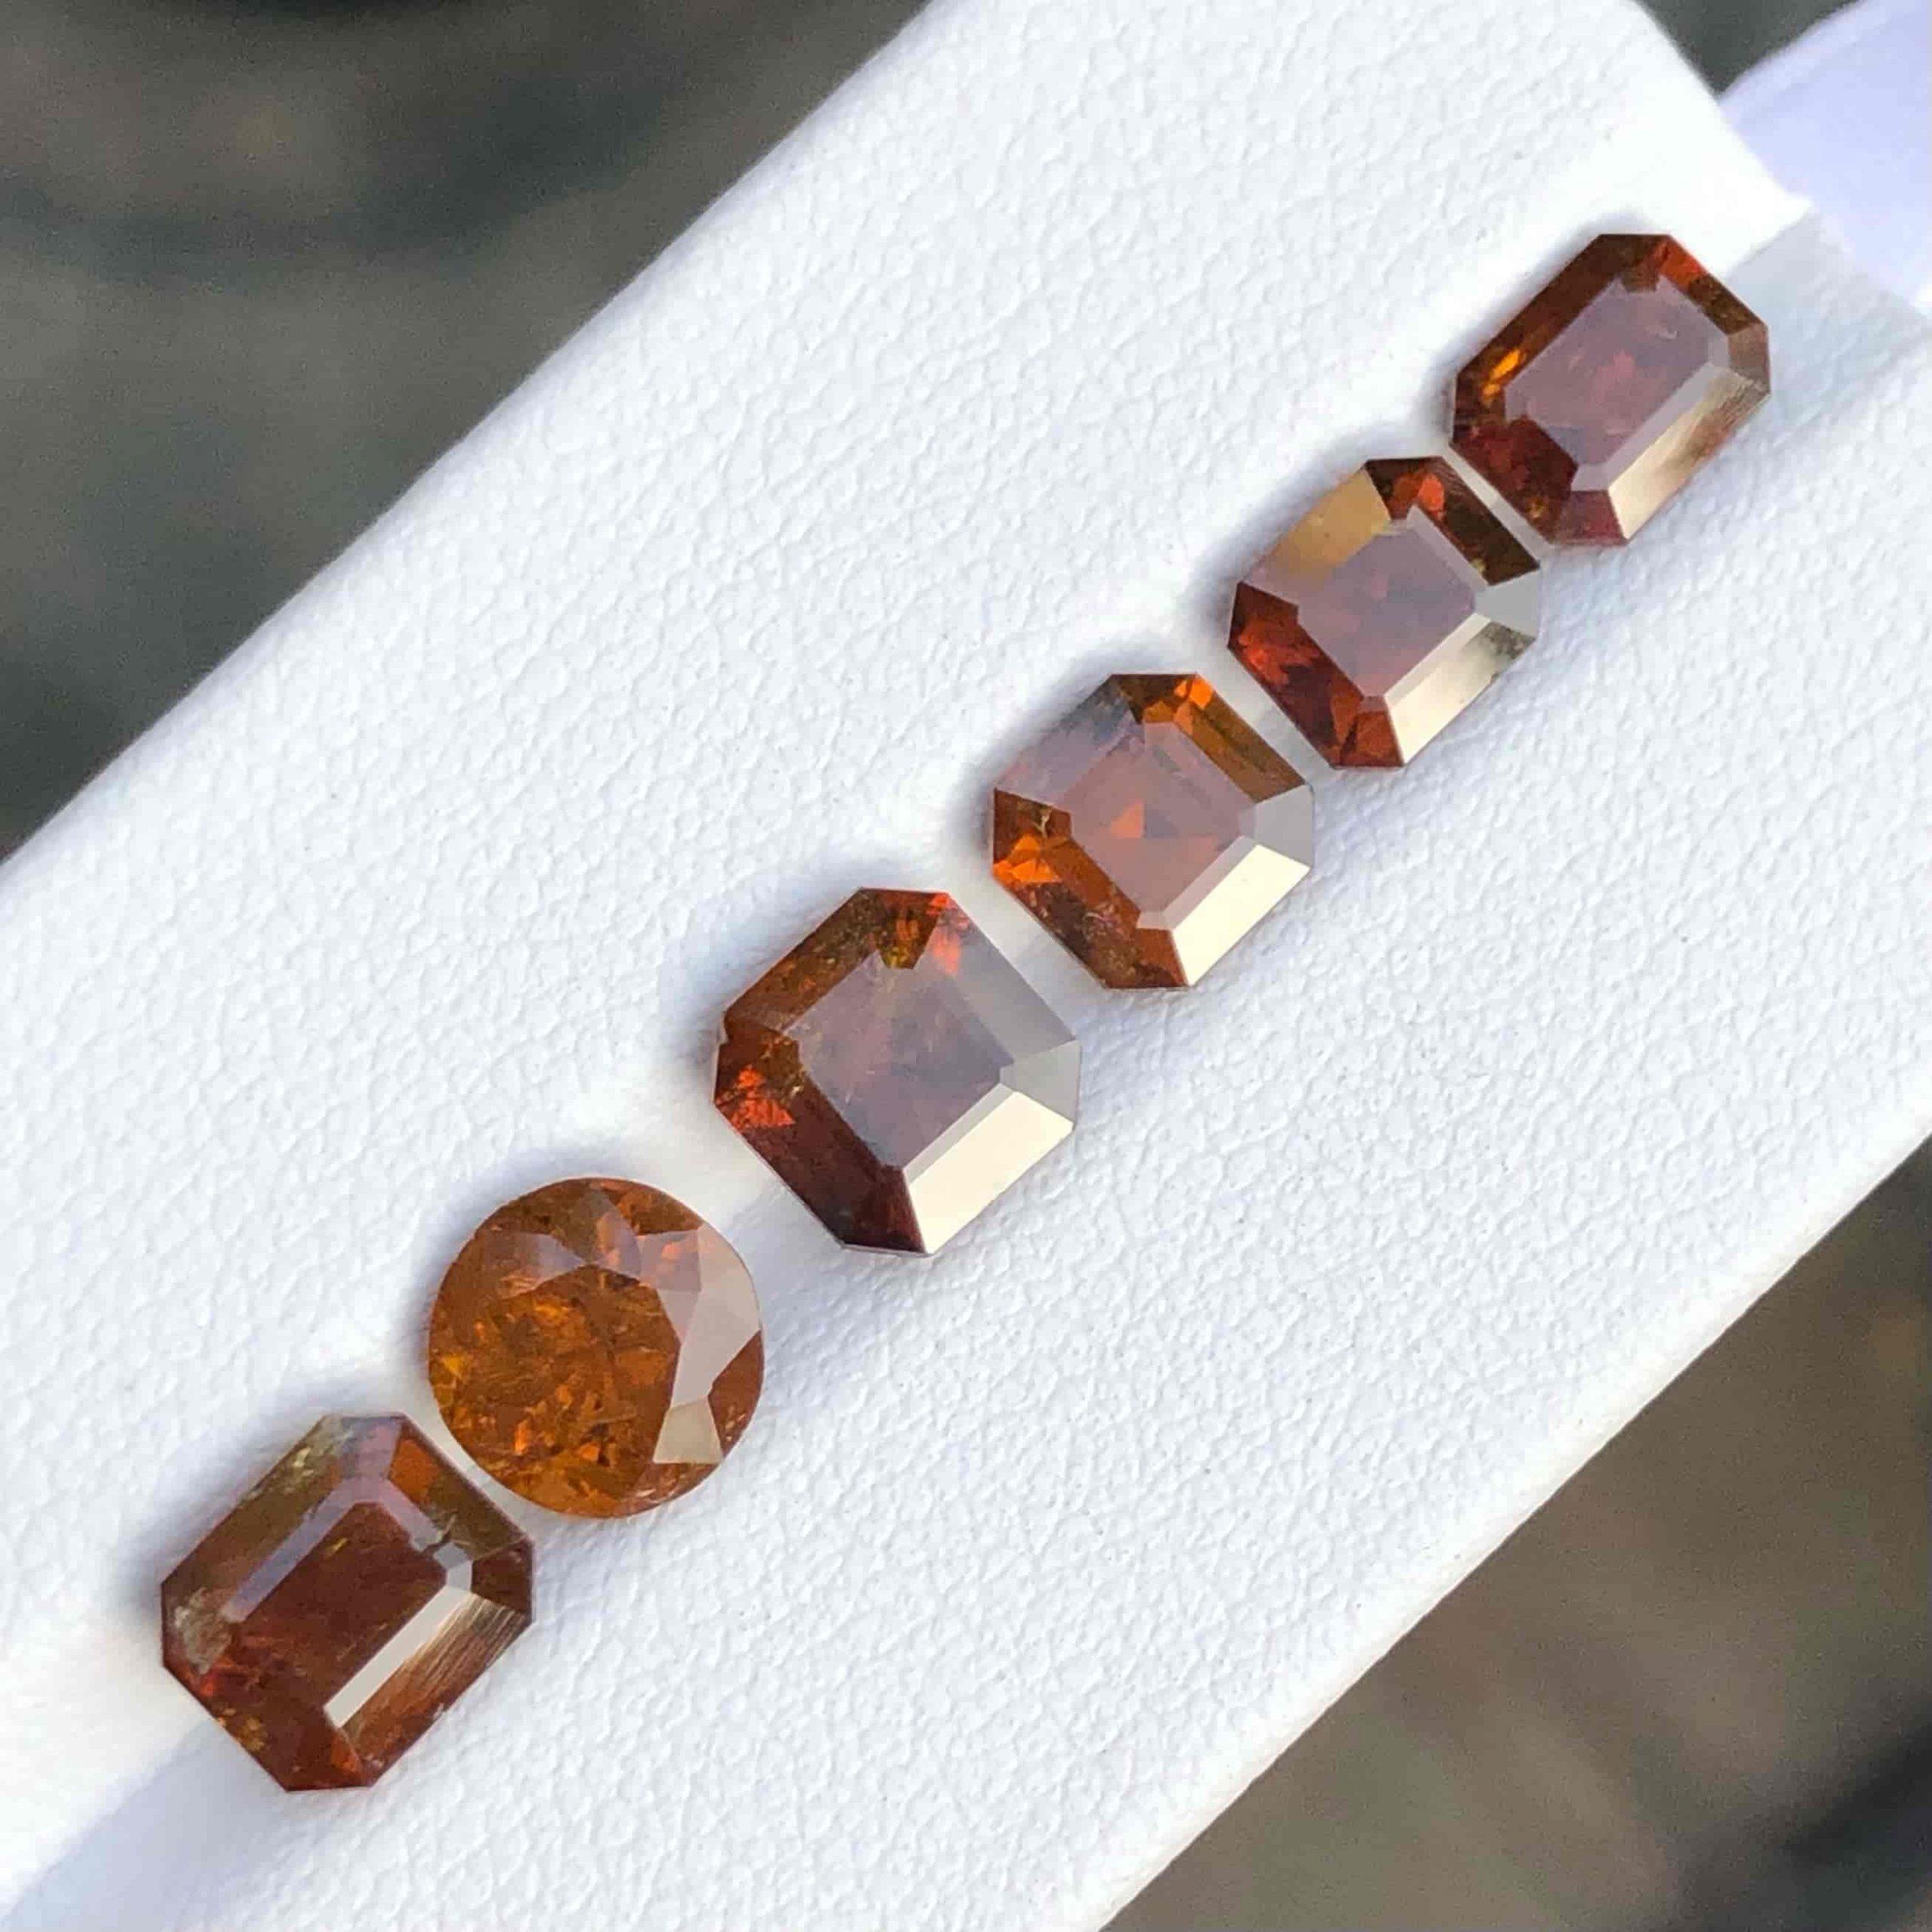 Taille mixte 10.15 carats Natural Brown Garnet Stones Lot Loose Gemstones From Mali Africa en vente